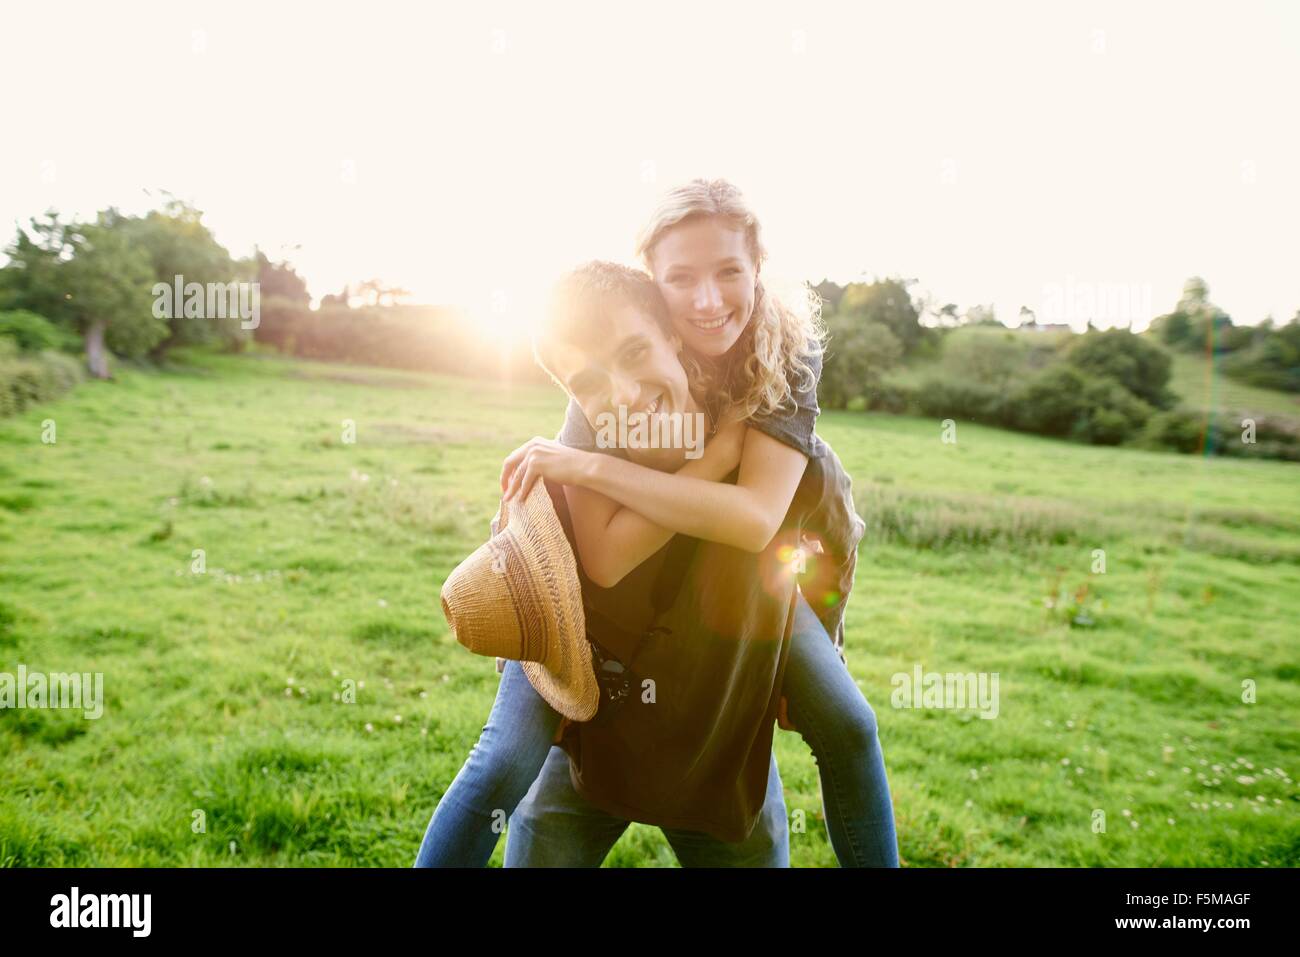 Portrait of young man giving girlfriend a piggyback in rural field Stock Photo